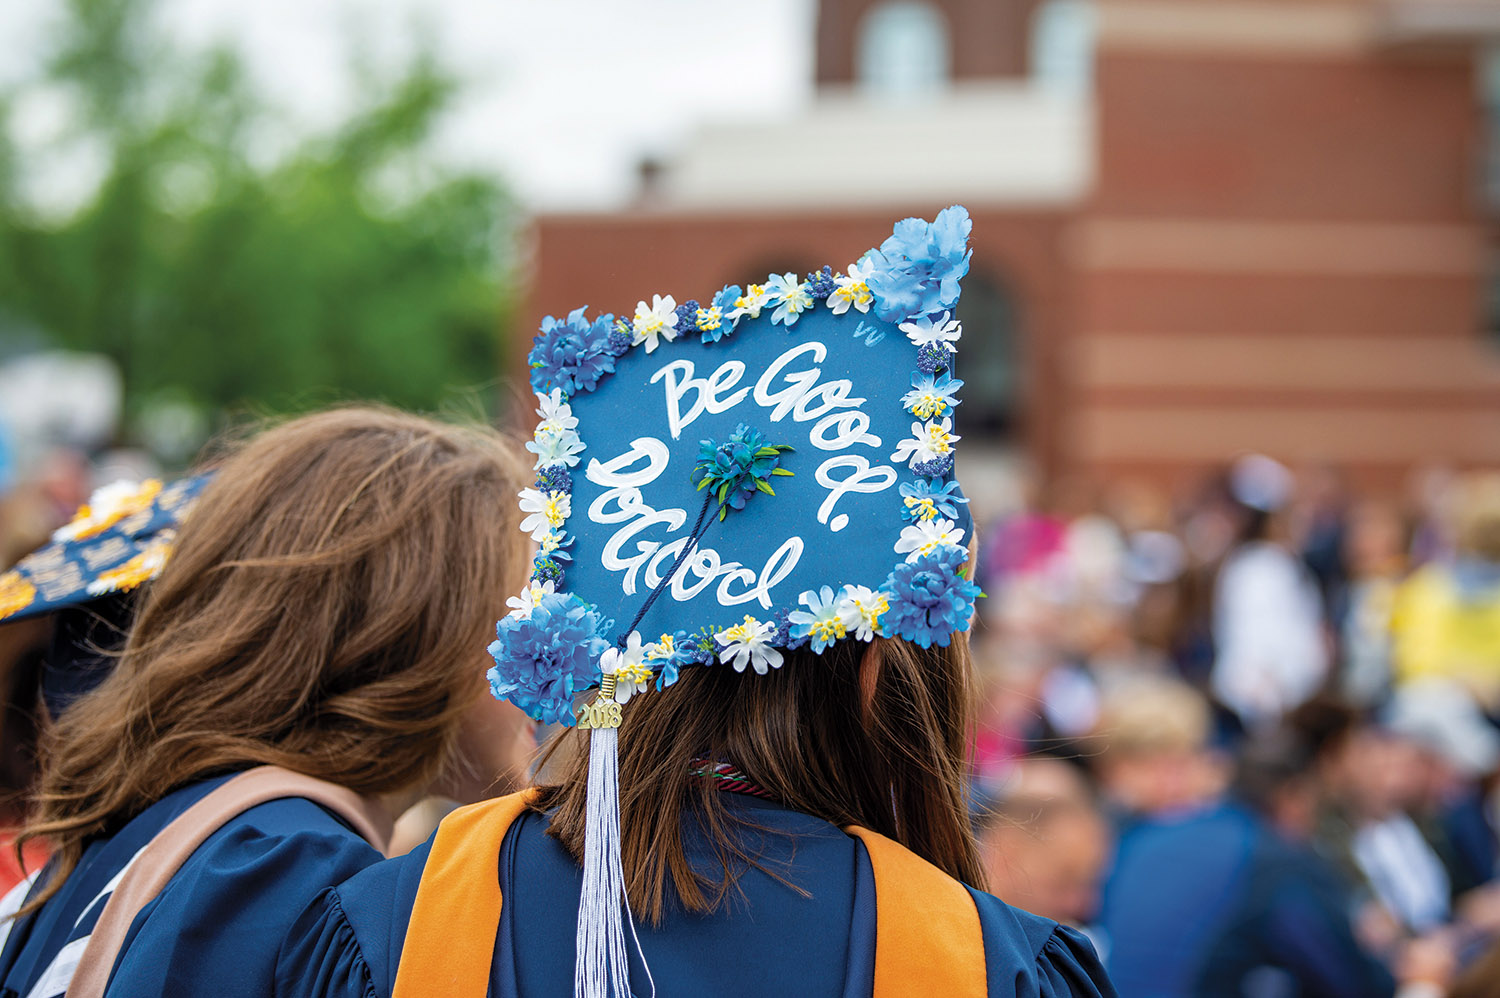 Female Villanova student wearing a graduation robe and mortarboard decorated with flowers and slogan “Be Good. Do Good.”